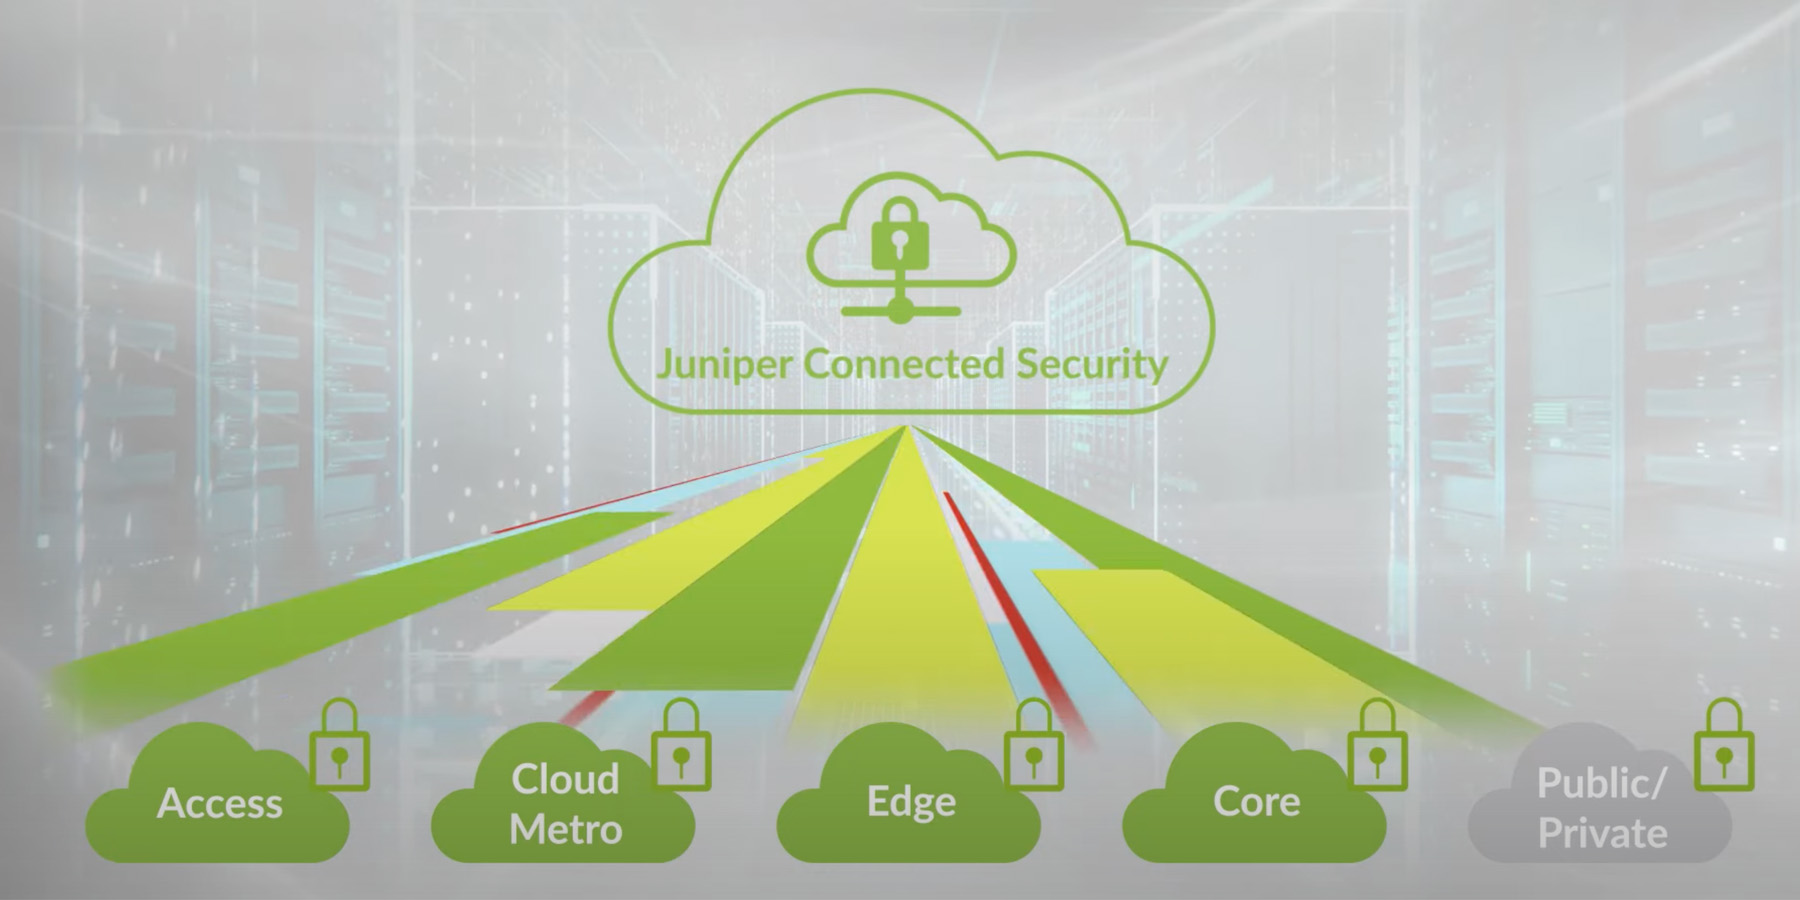 Juniper Connected Security for Service Providers Secures Every Point of Connection – From Edge to Cloud